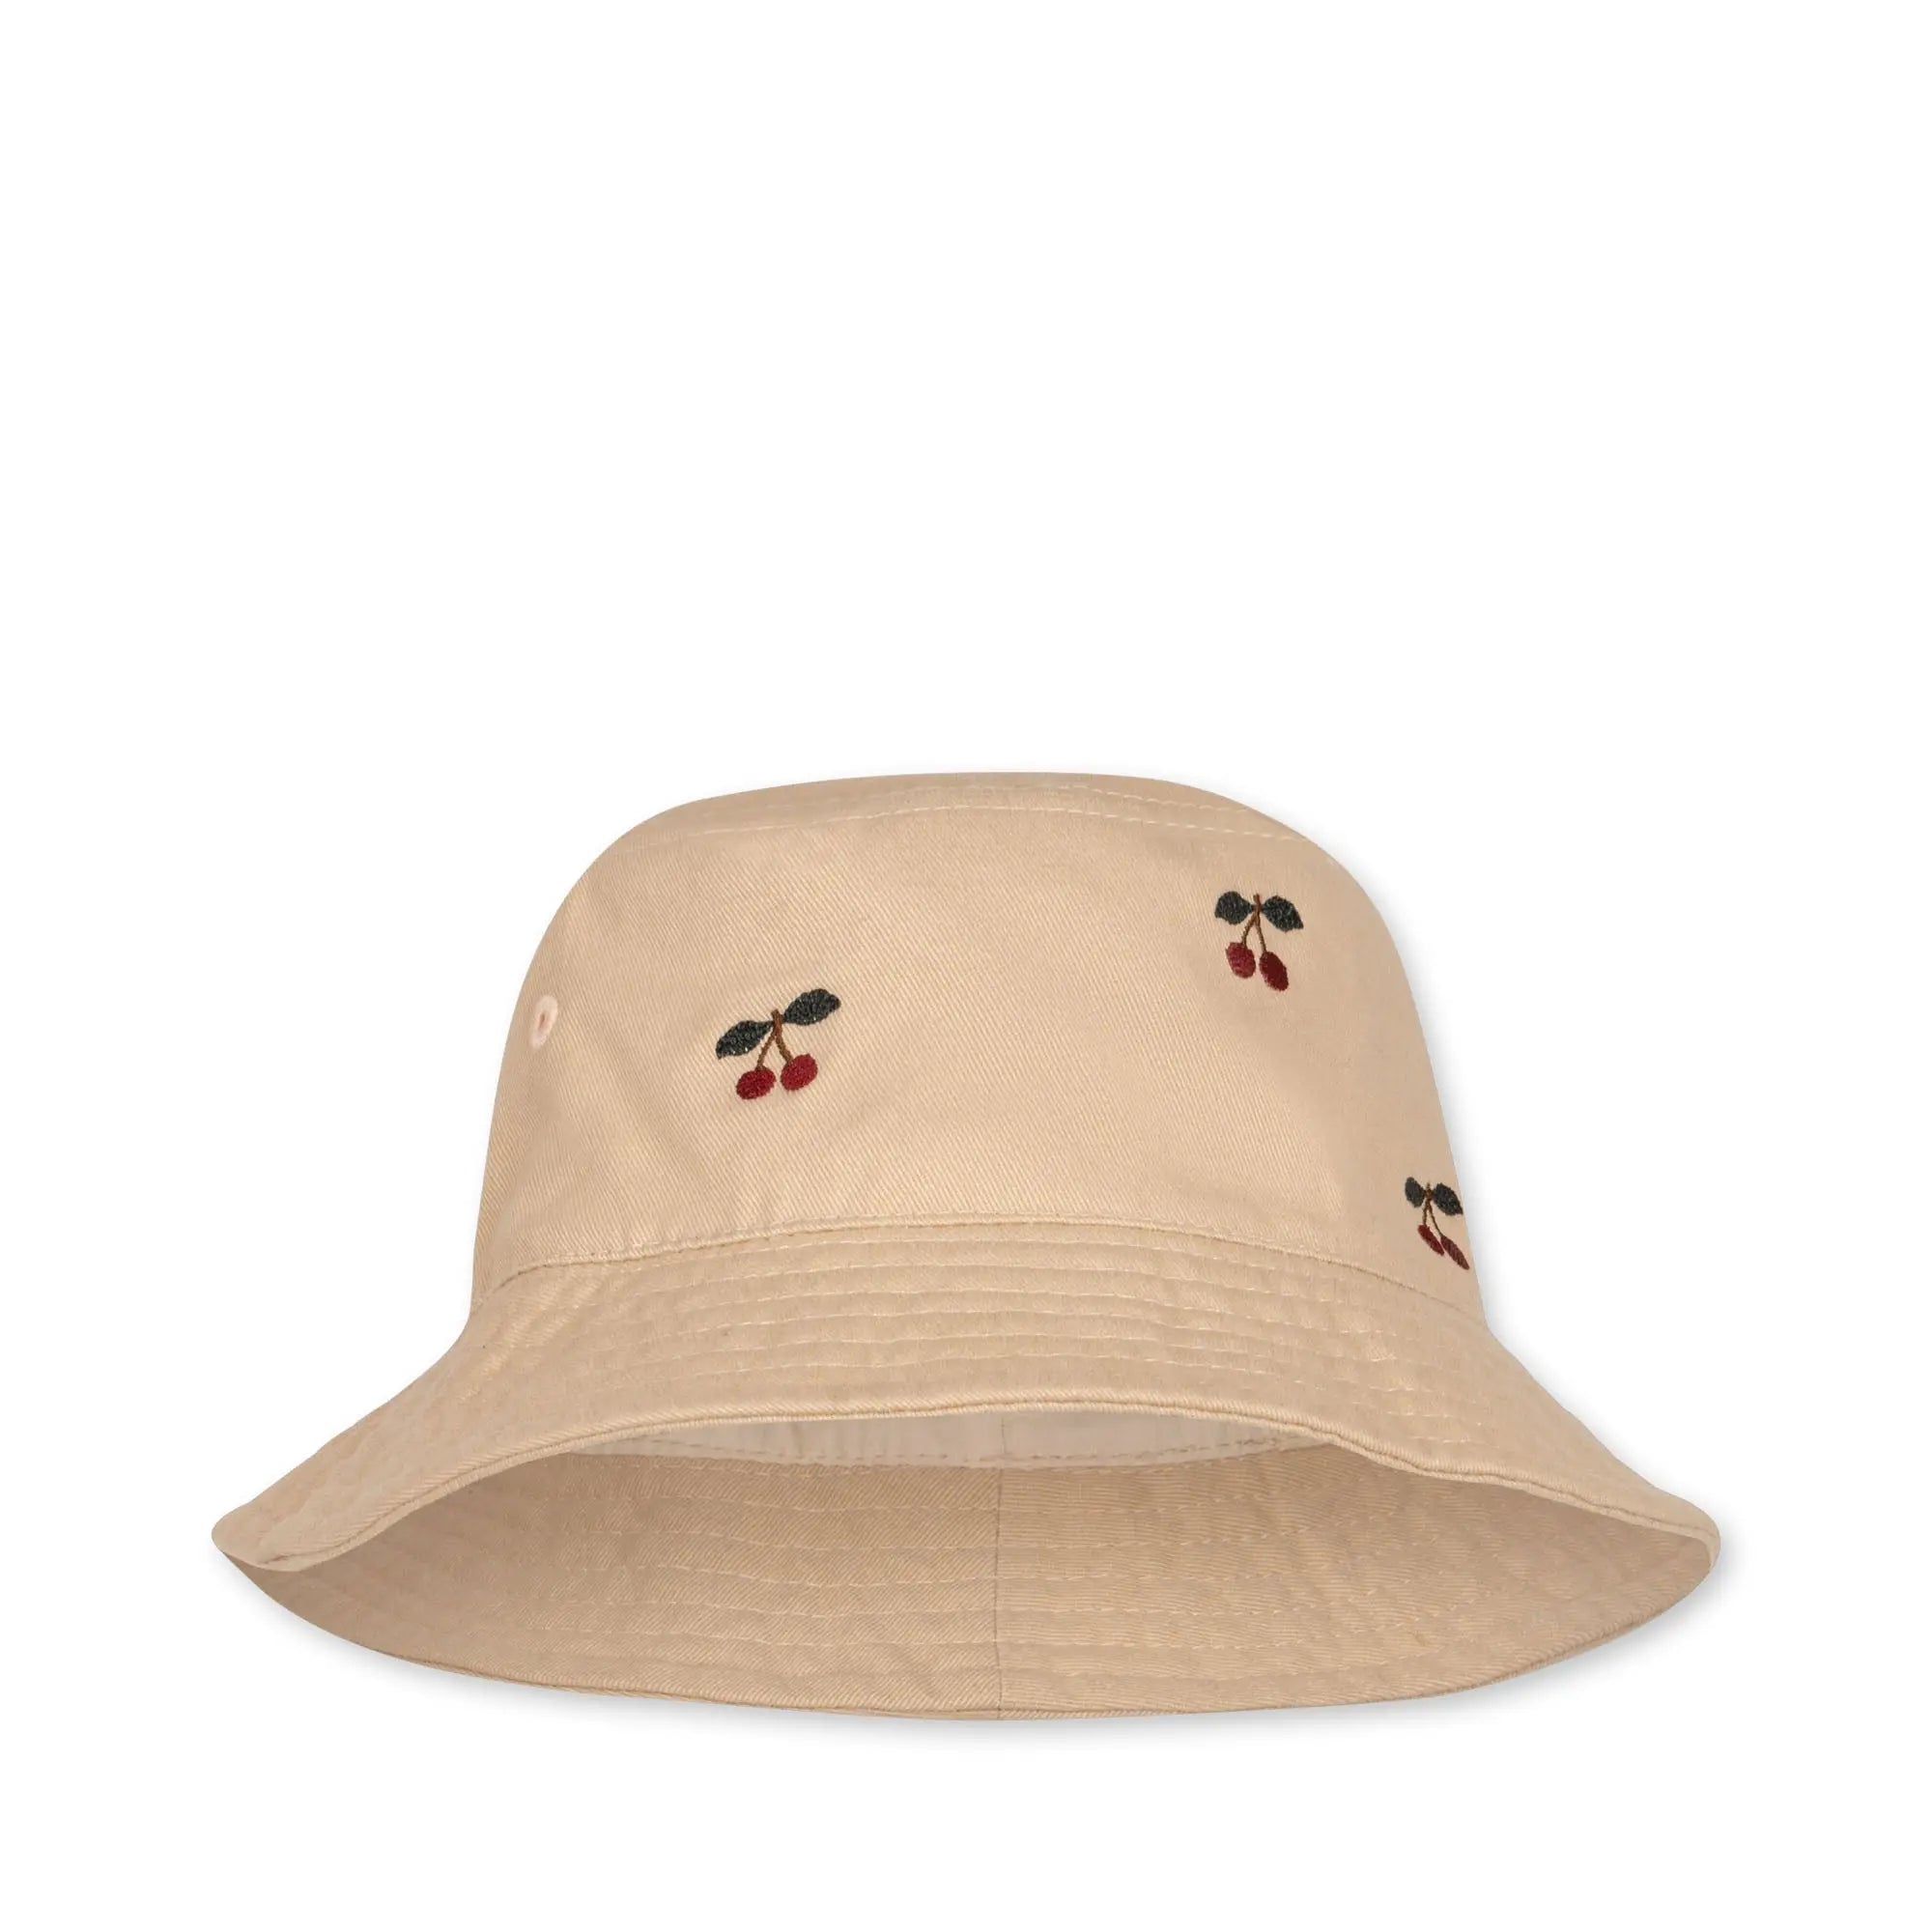 Mon Bucket Hat - Toasted Almond, Wide Brim Hat, Sun Protection Cap  Konges Sløjd Toasted Almond 5-8Y 